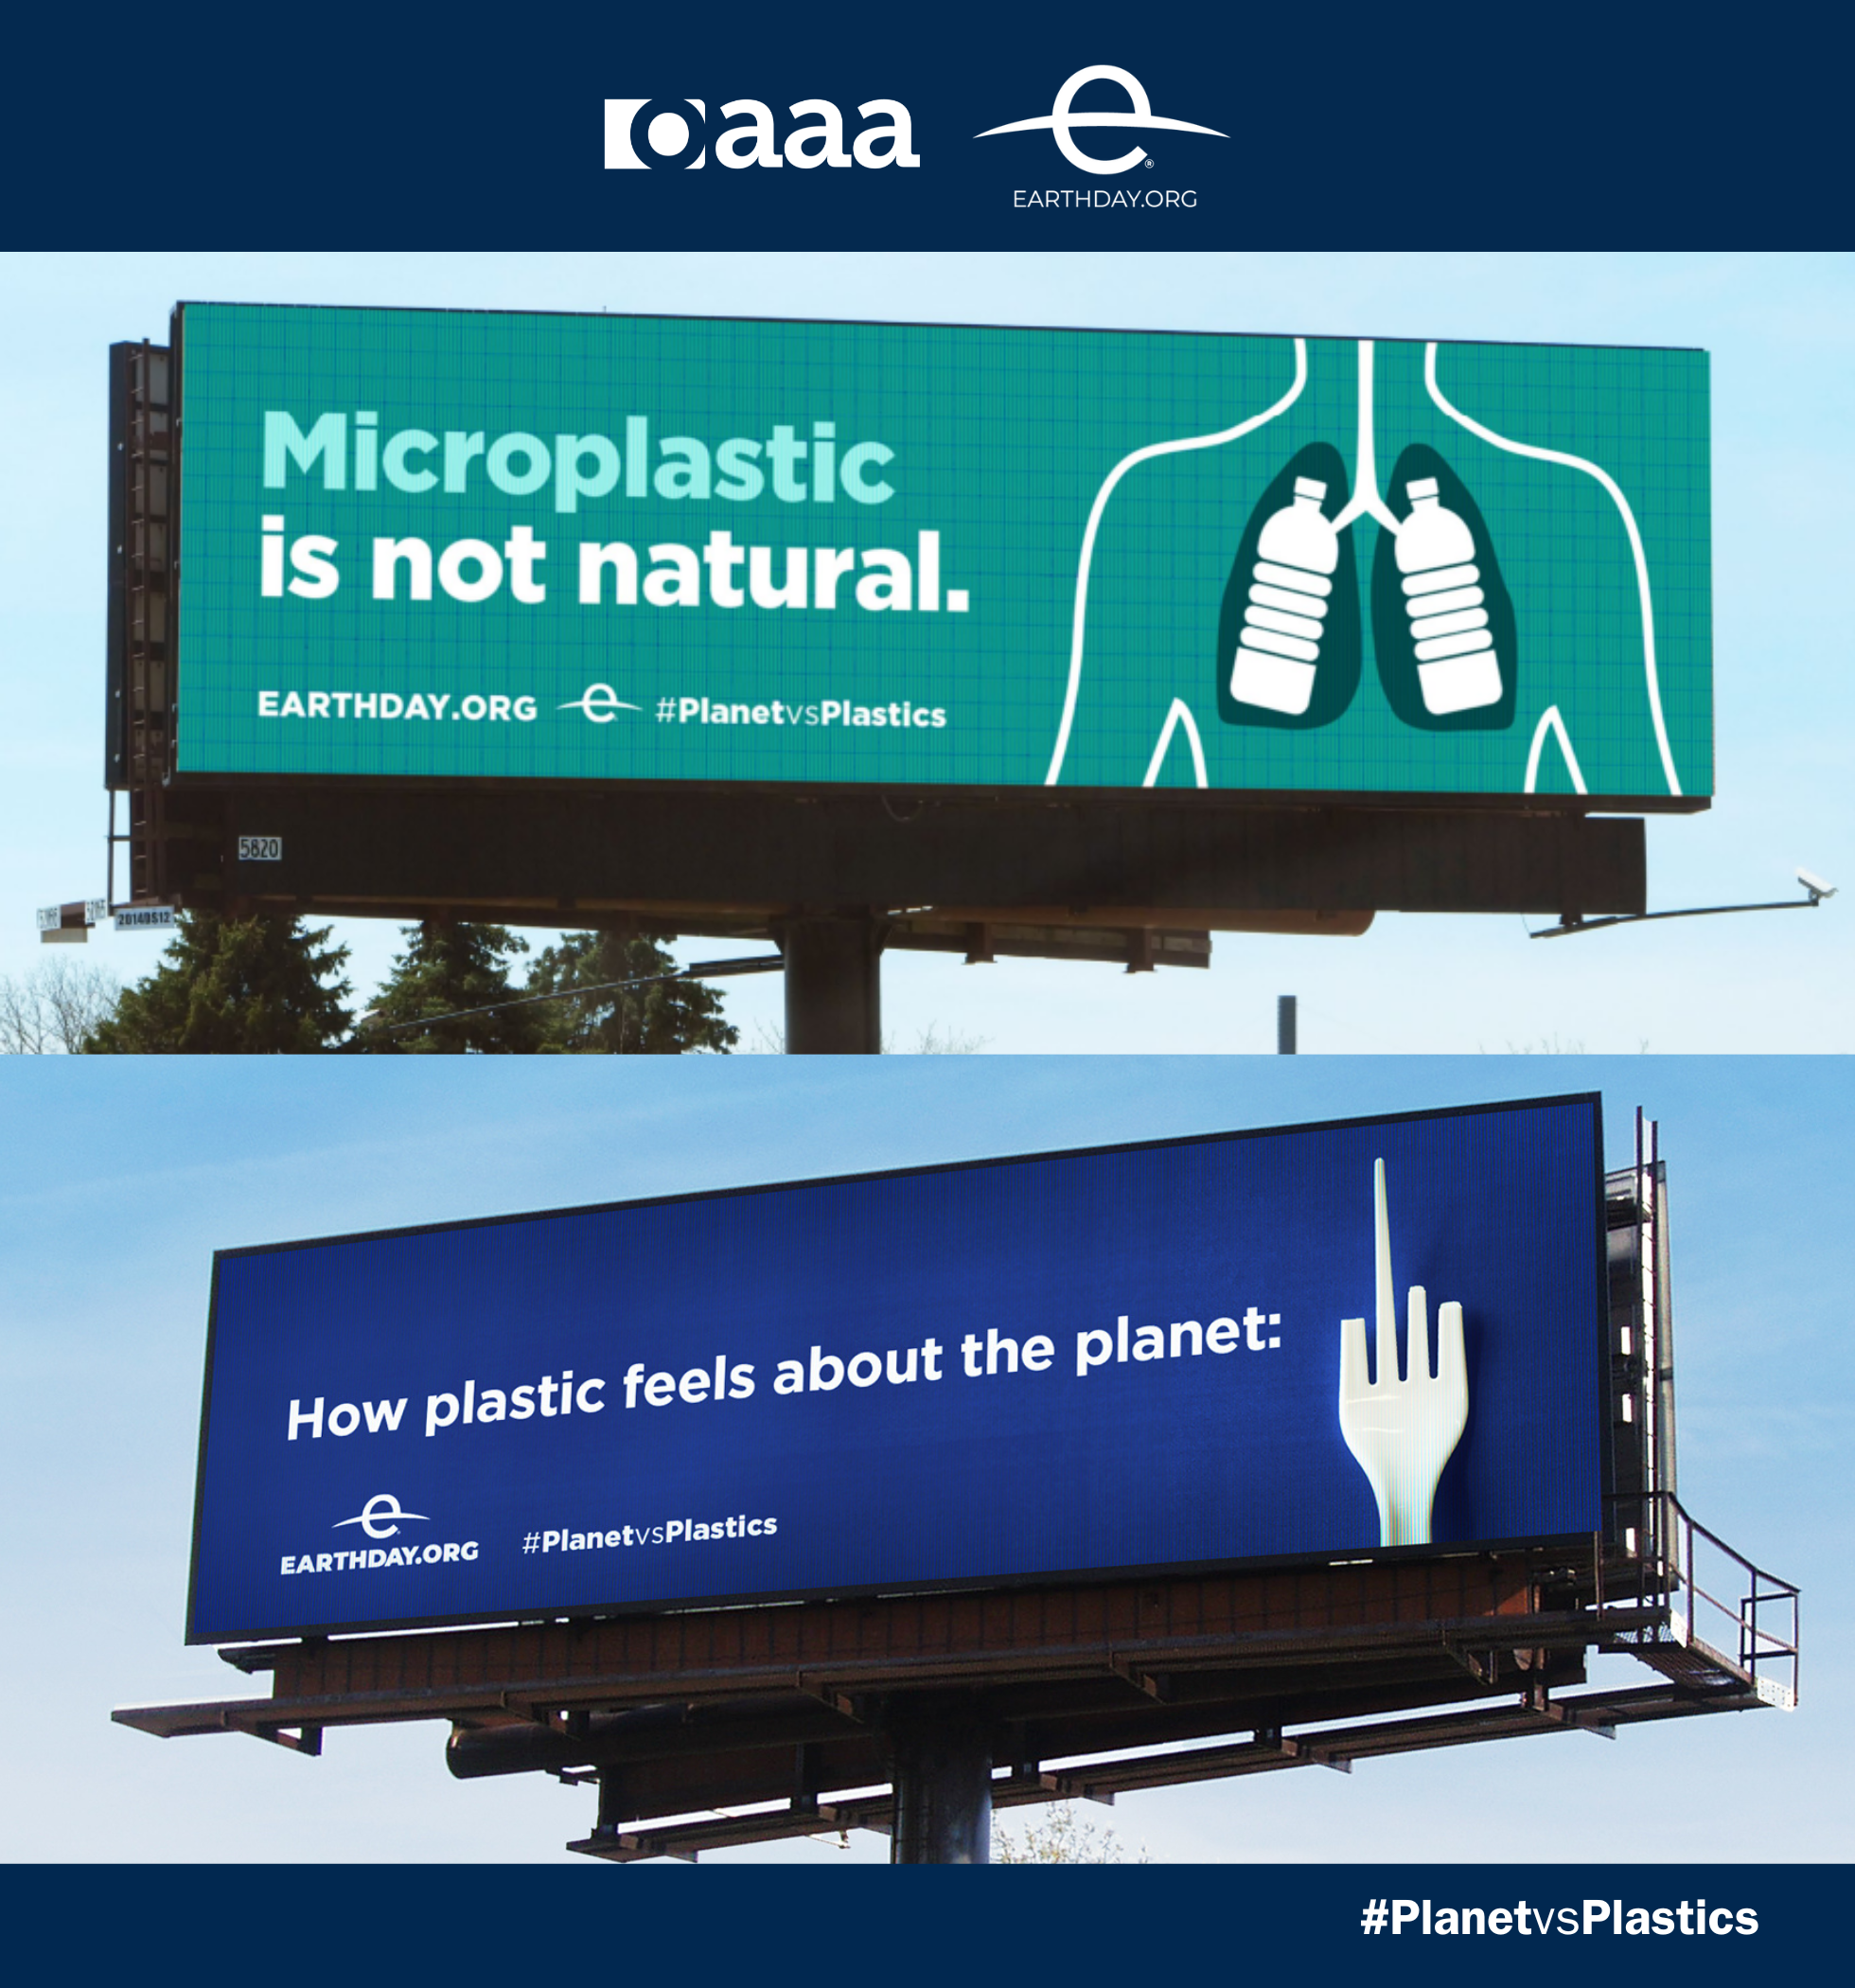 EARTHDAY.ORG Partners With OAAA To Bring Awareness To The Dangers Of Plastics To Human Health